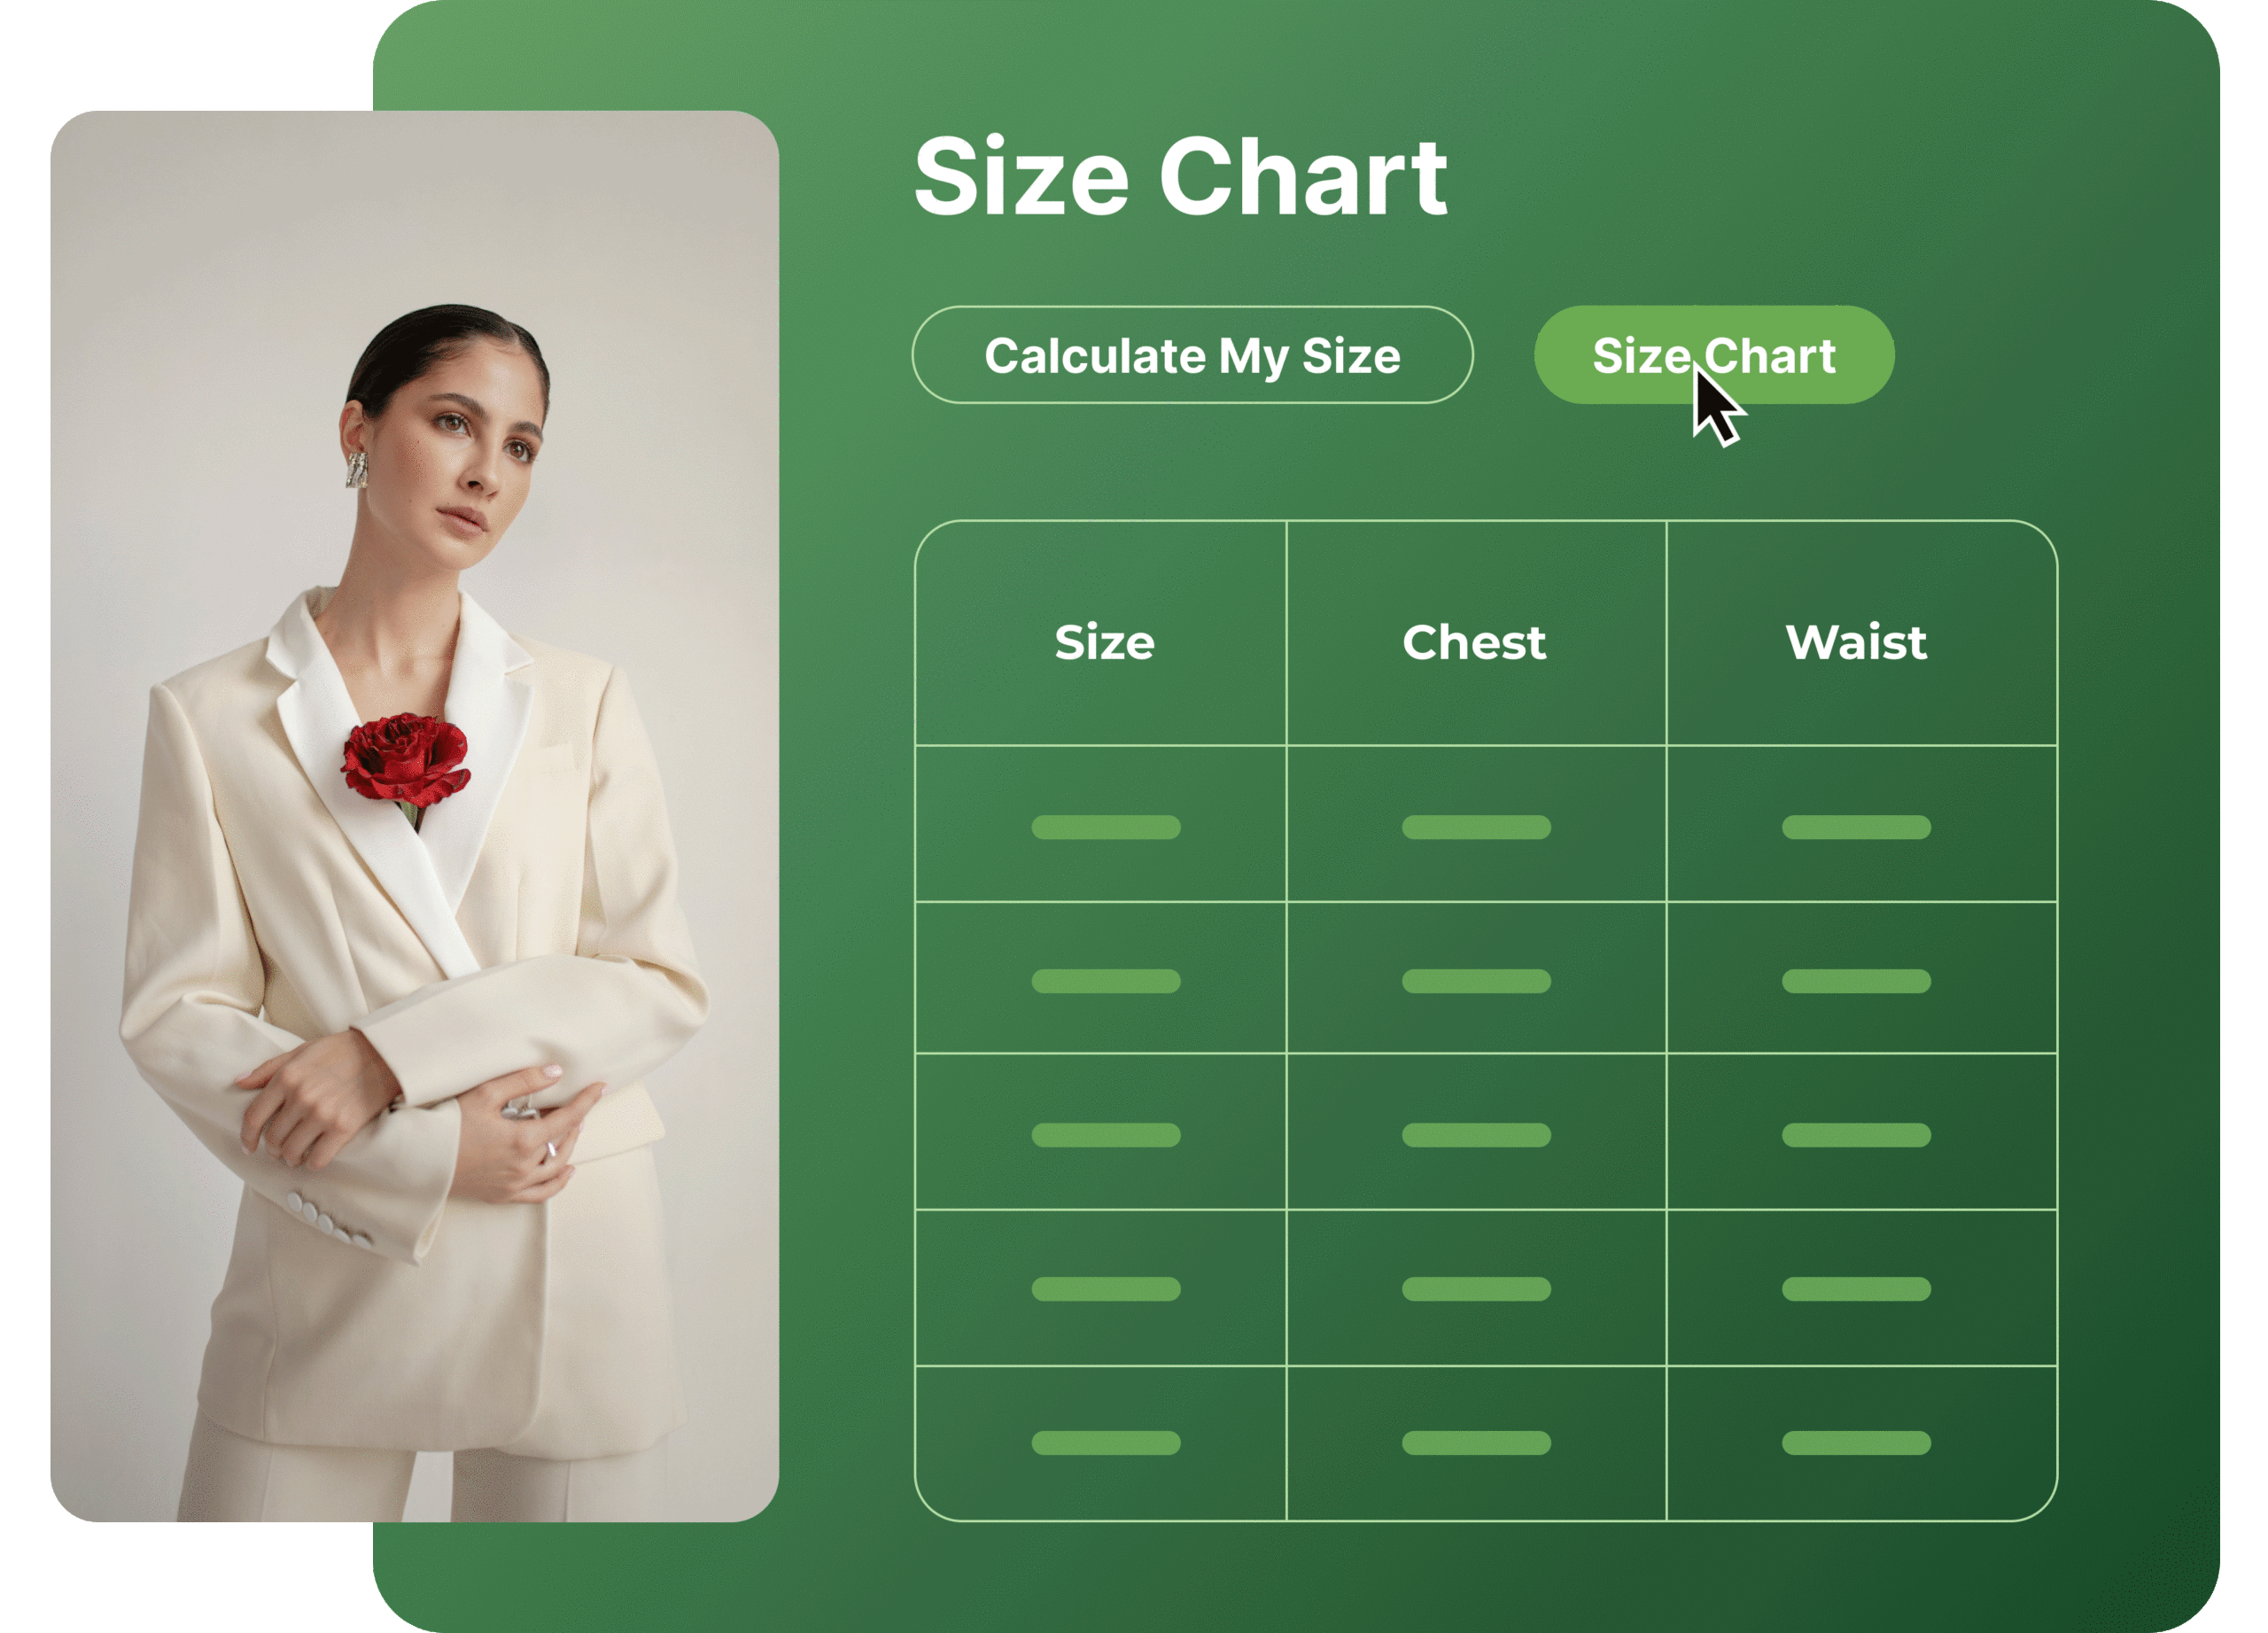 Kiwi Sizing Examples with size chart and recommendations